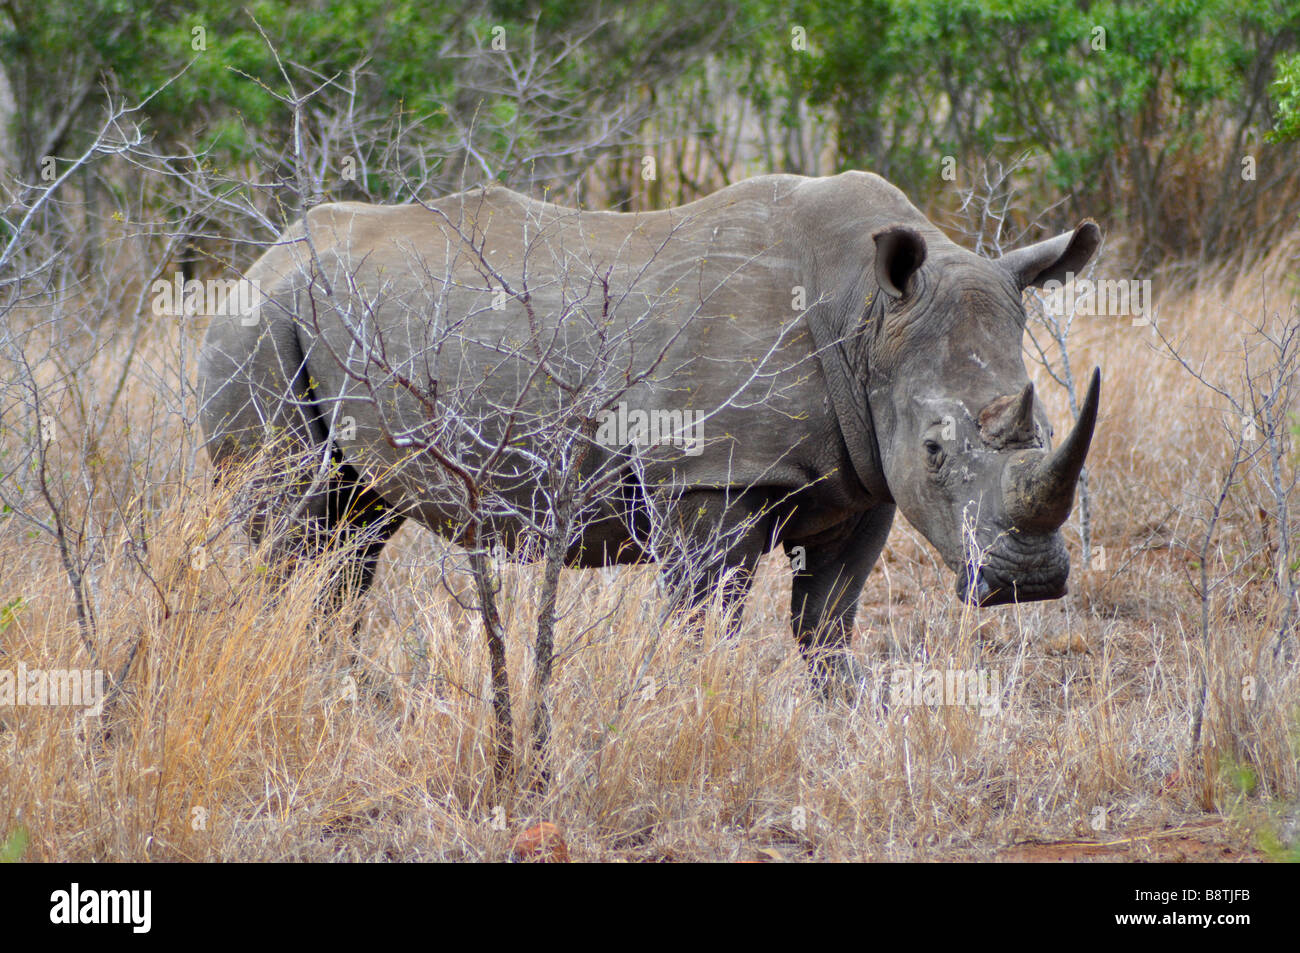 White Rhino in Kruger National Park South Africa Stock Photo